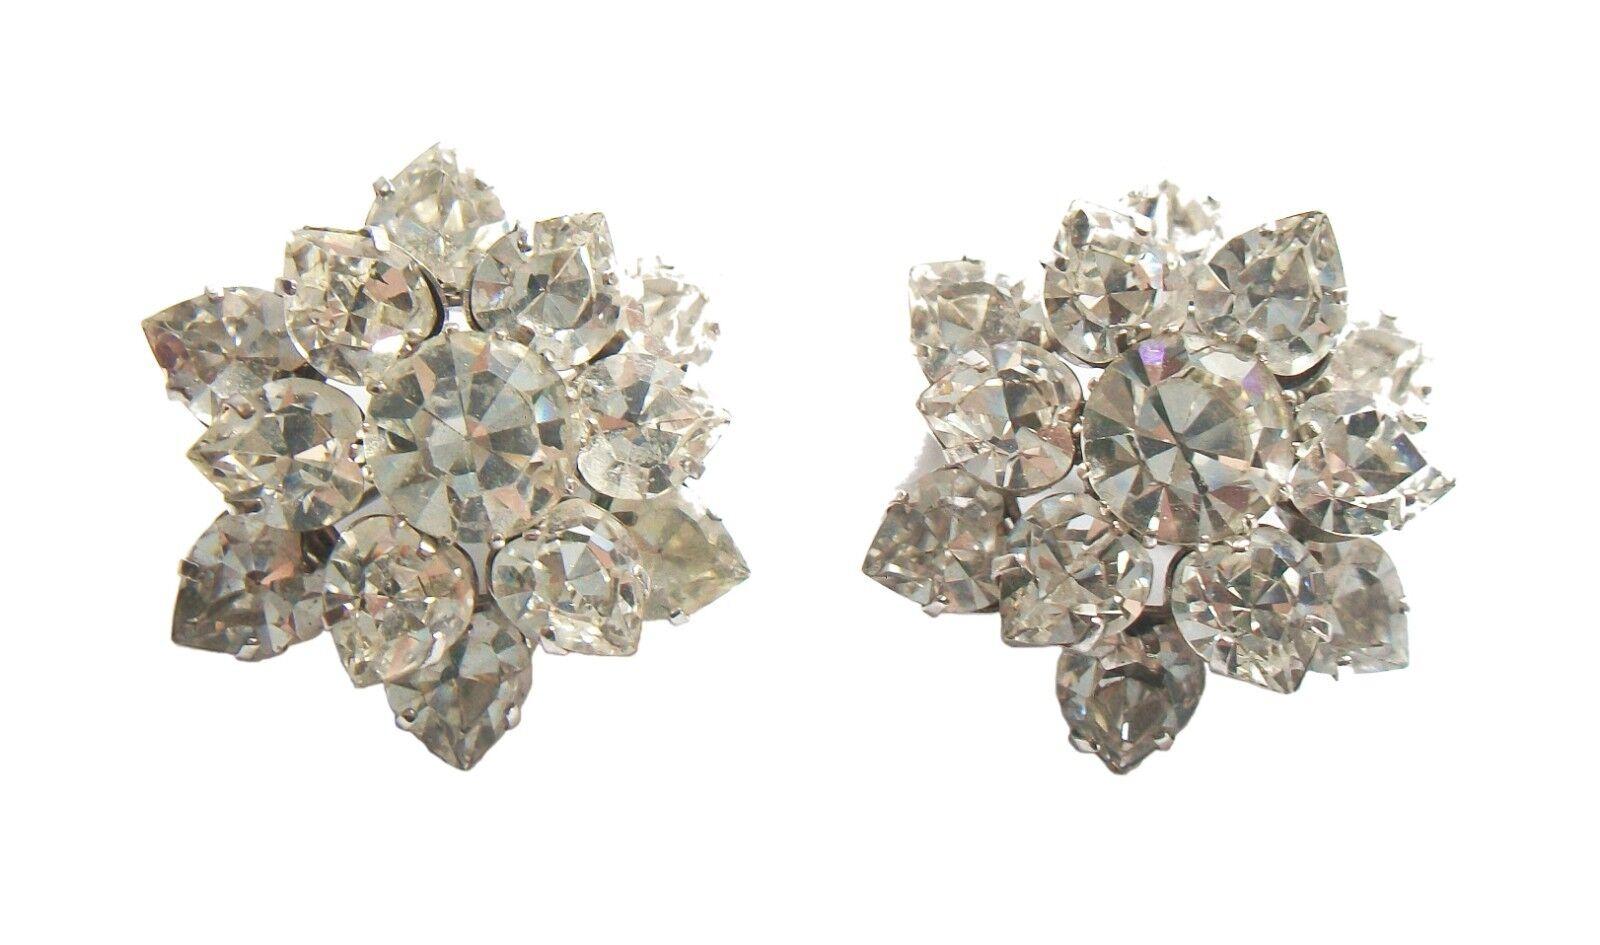 Vintage pair of Austrian crystal rhinestone brooches - fine old world European quality - central round cut crystals surrounded by two level pear shaped stones - original pin with safety catch - 'MADE IN AUSTRIA' stamp on the back - unsigned - mid